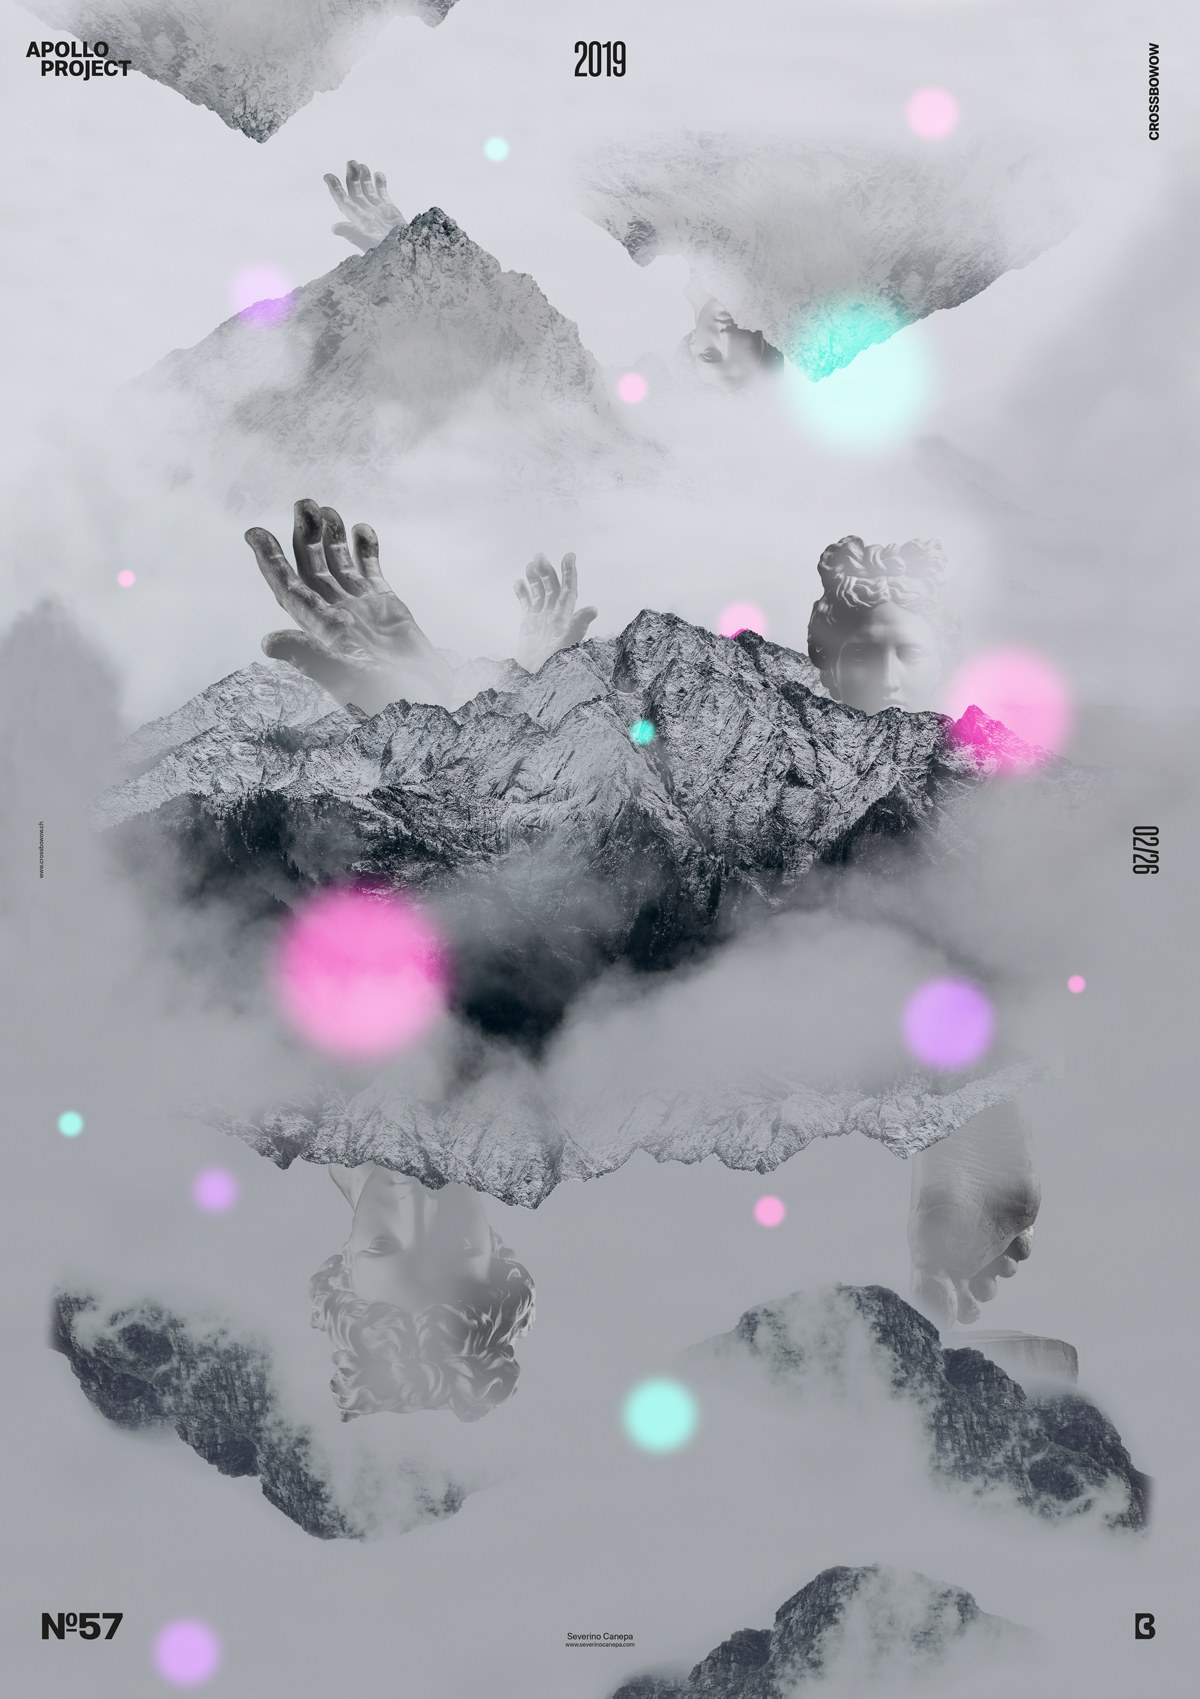 Strange poster design #57 made with mountains, mist and Apollo's head, hand and foot